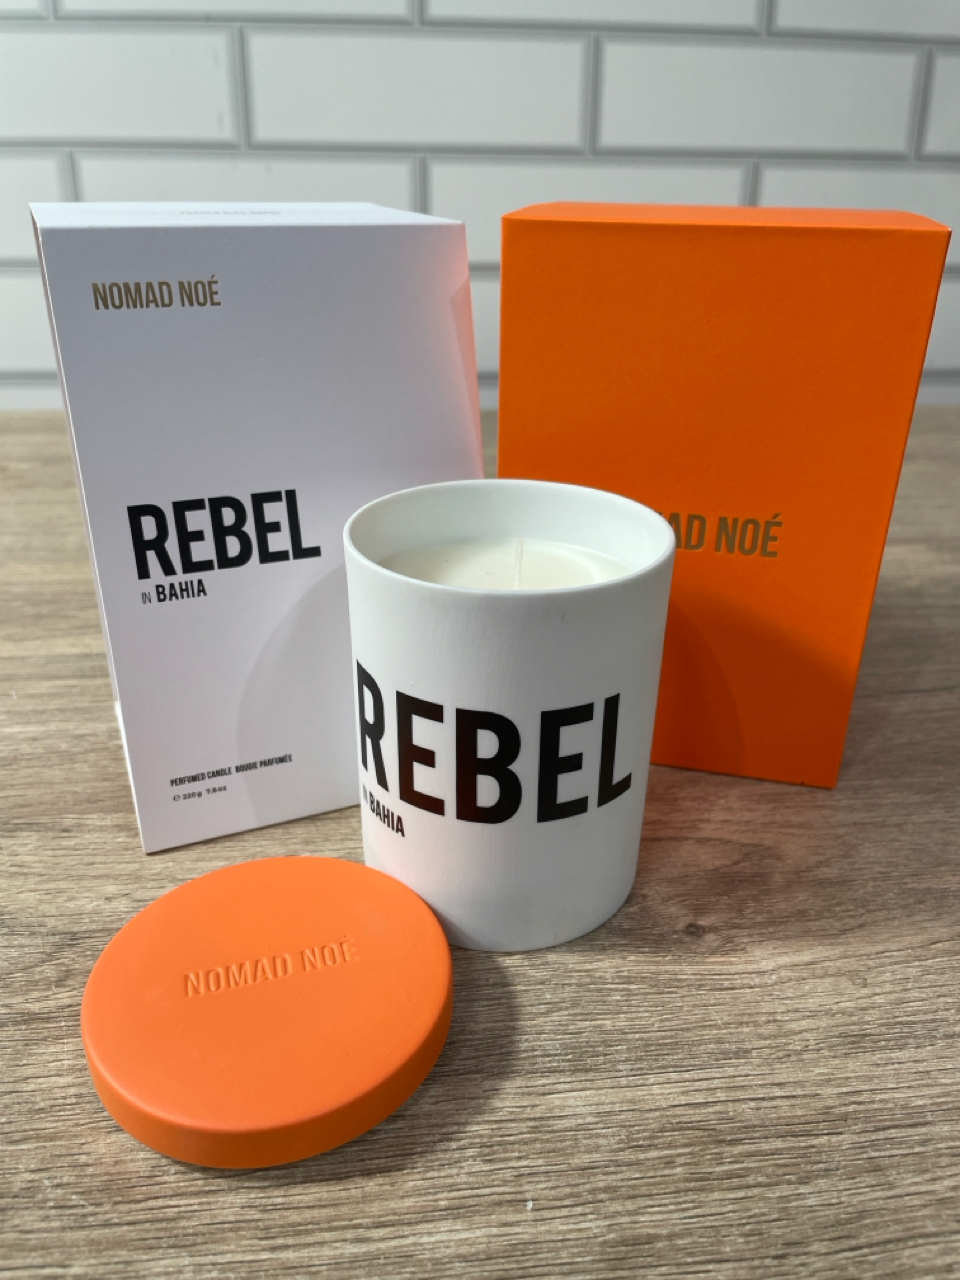 Rebel Scented Candle from Nomad Noe - Image 3 of 4